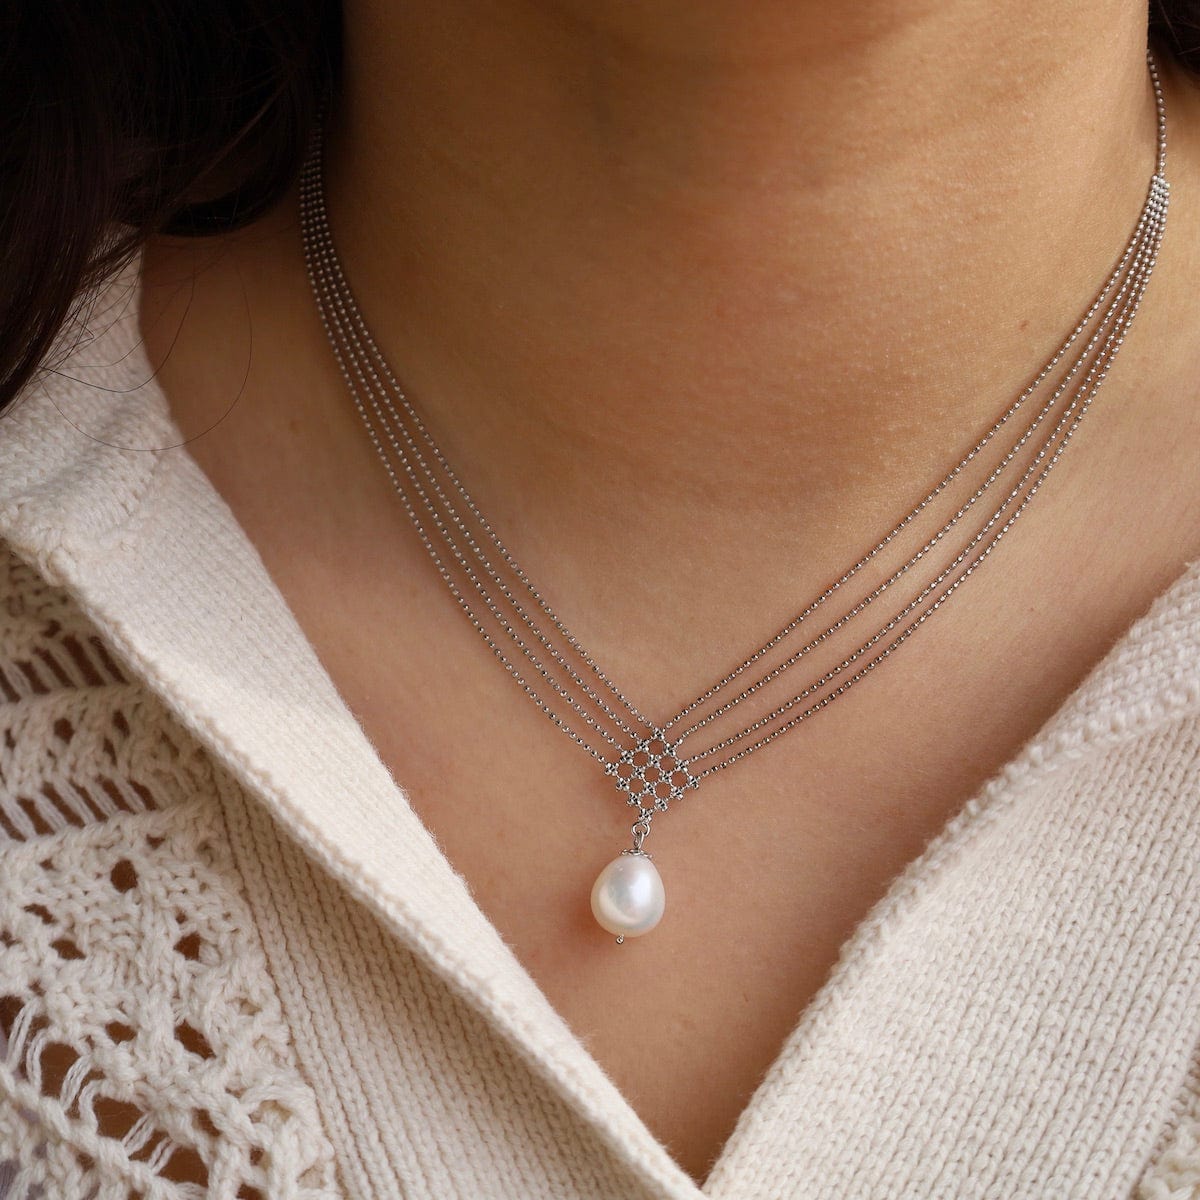 NKL 4 Strand Draped & Diamond with Pearl Necklace